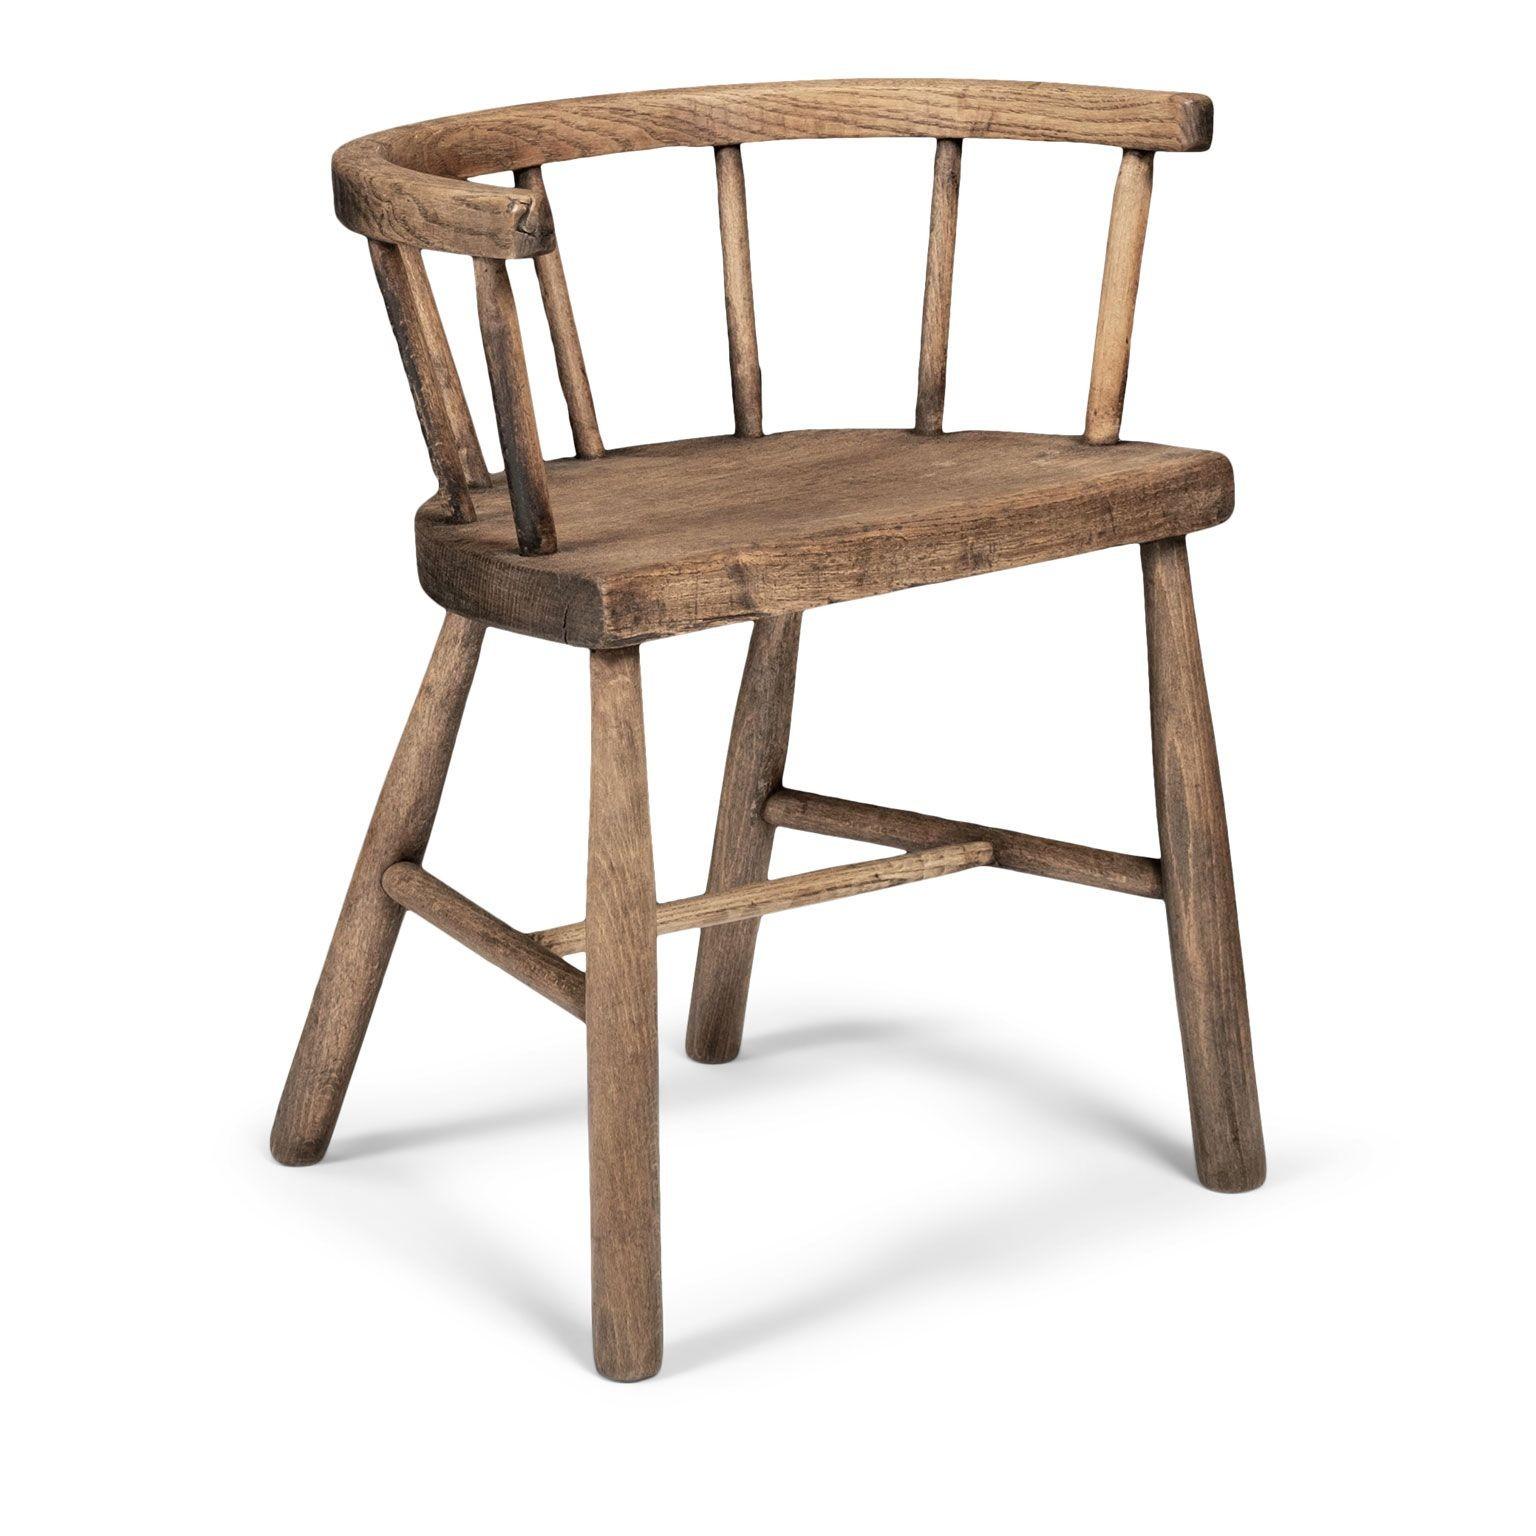 19th century small vernacular chair circa 1880-1909, England. Constructed in a mid-brown finished ash with spindle back and horseshoe-yoke. Functioned as a work stool or child's chair.

Note: Due to regional changes in humidity and climate during